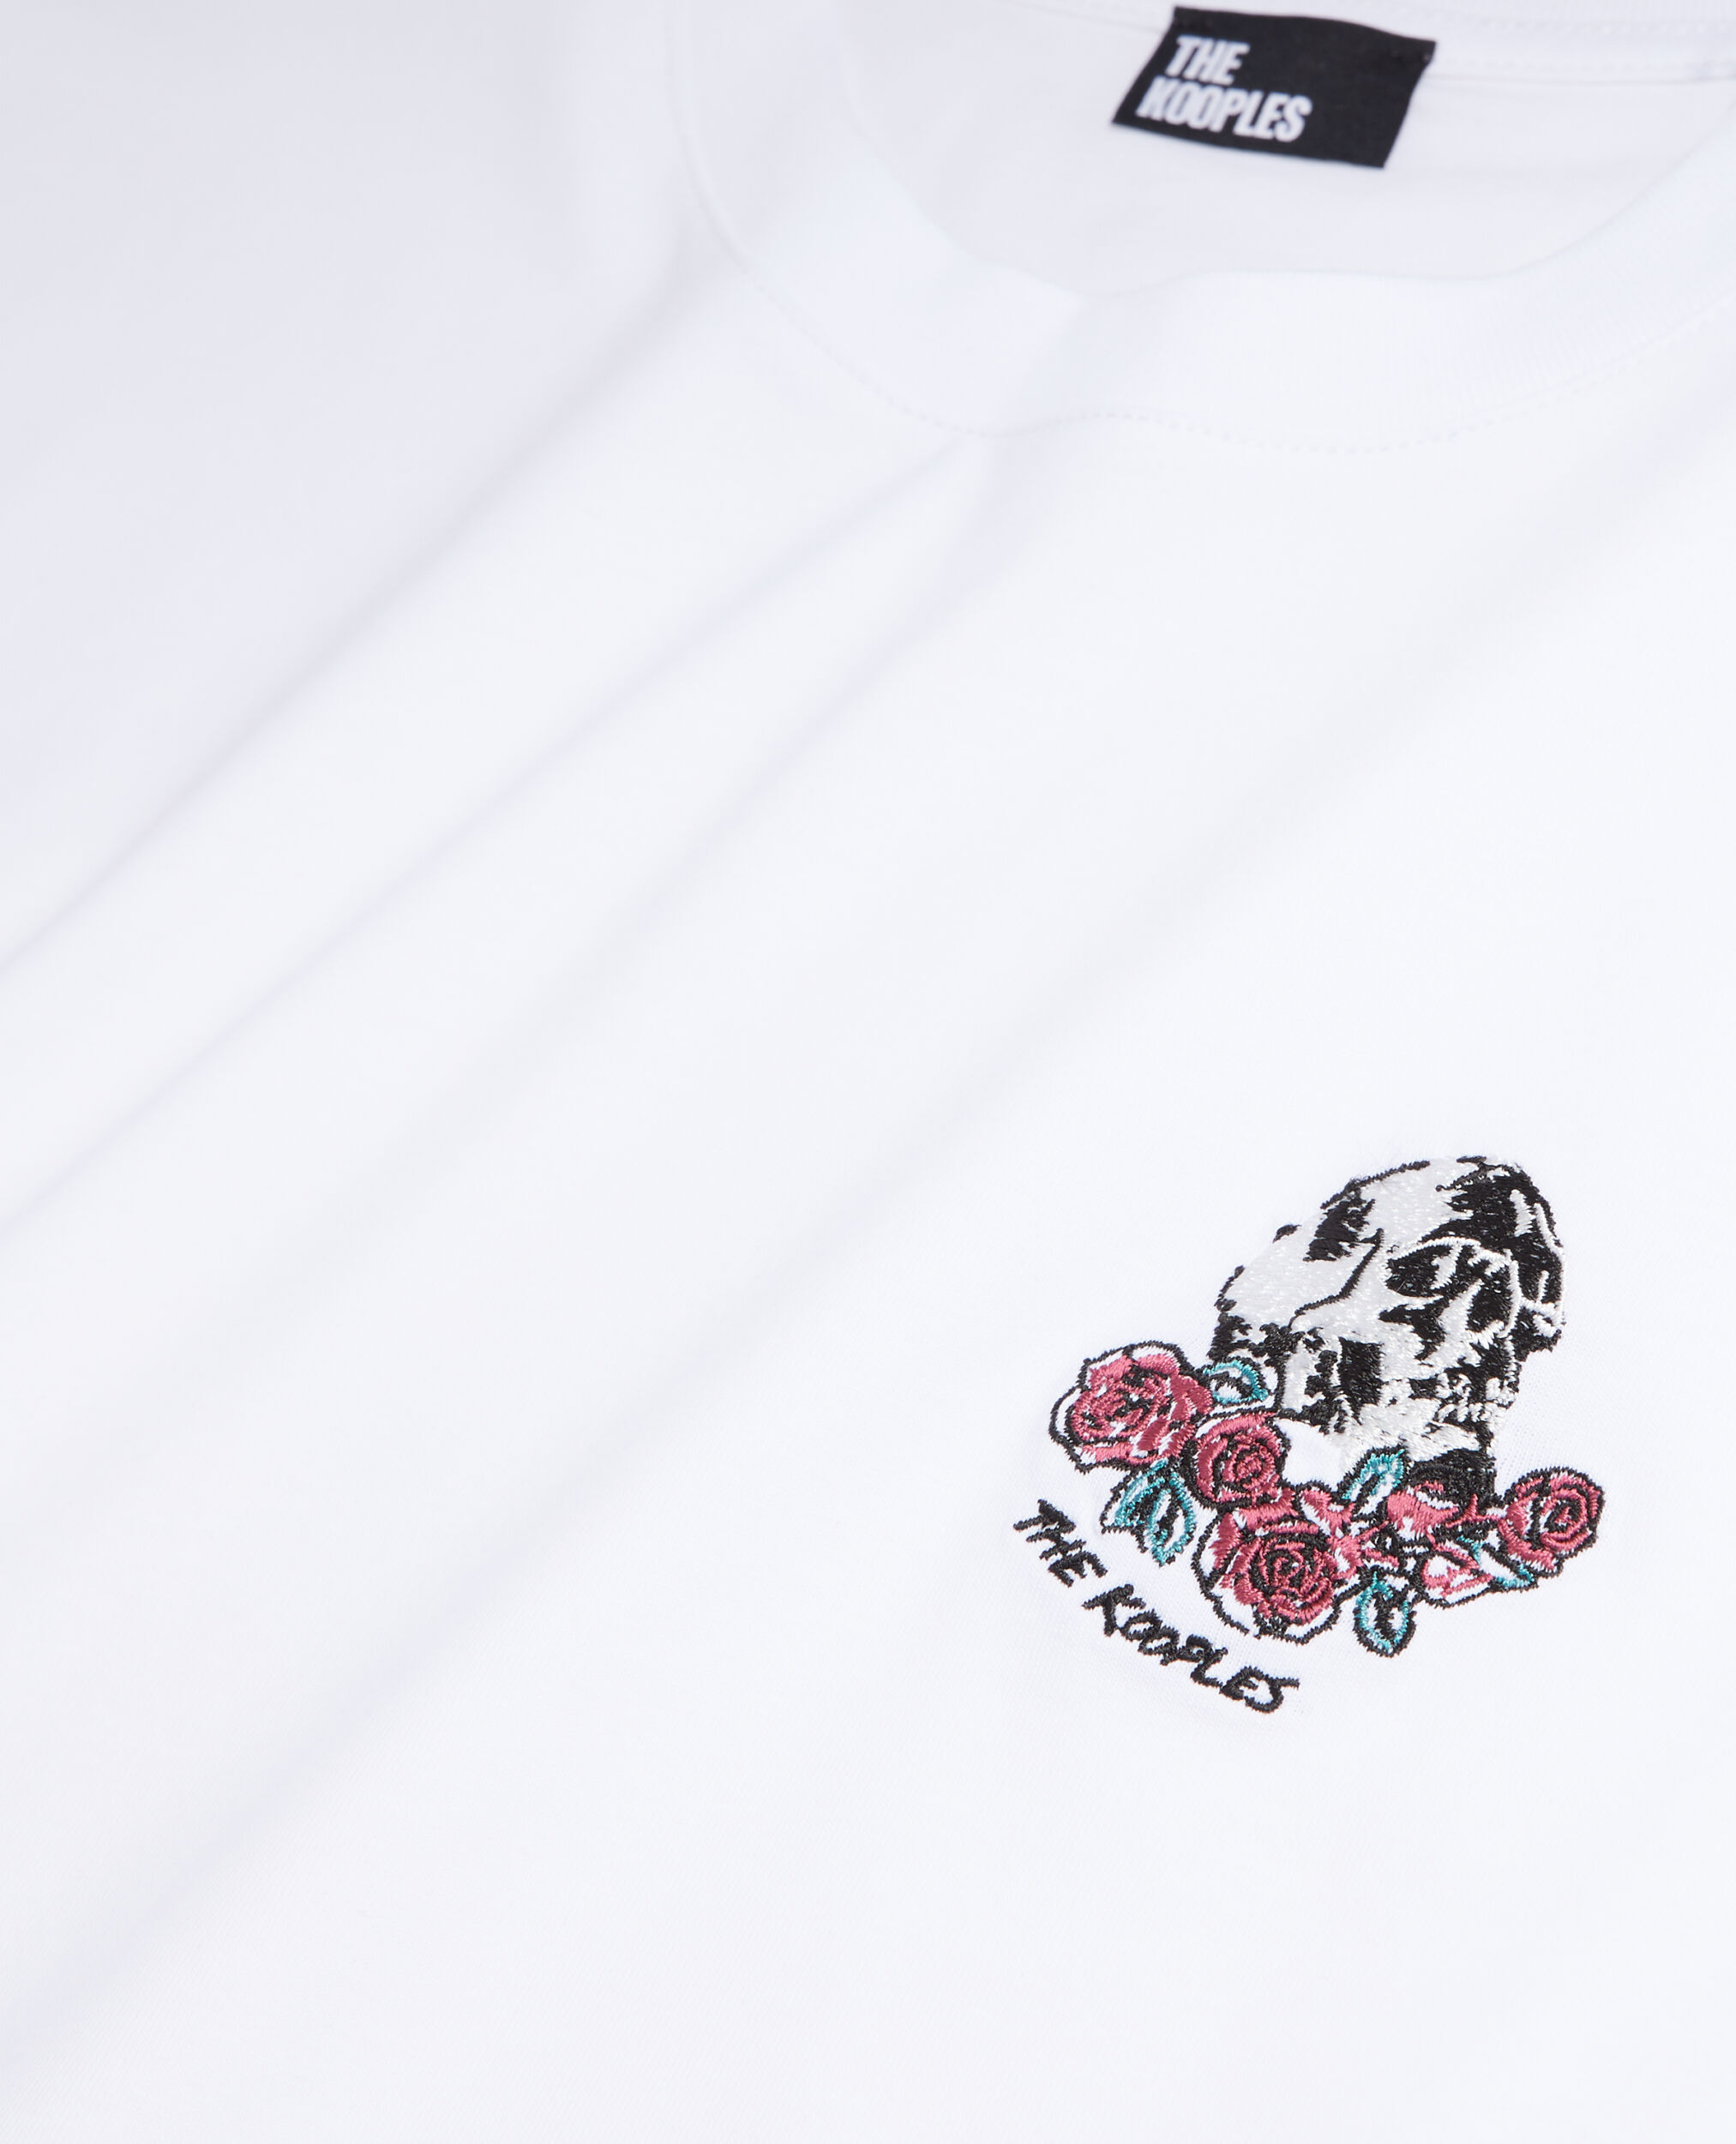 Men's white t-shirt with vintage skull embroidery, WHITE, hi-res image number null